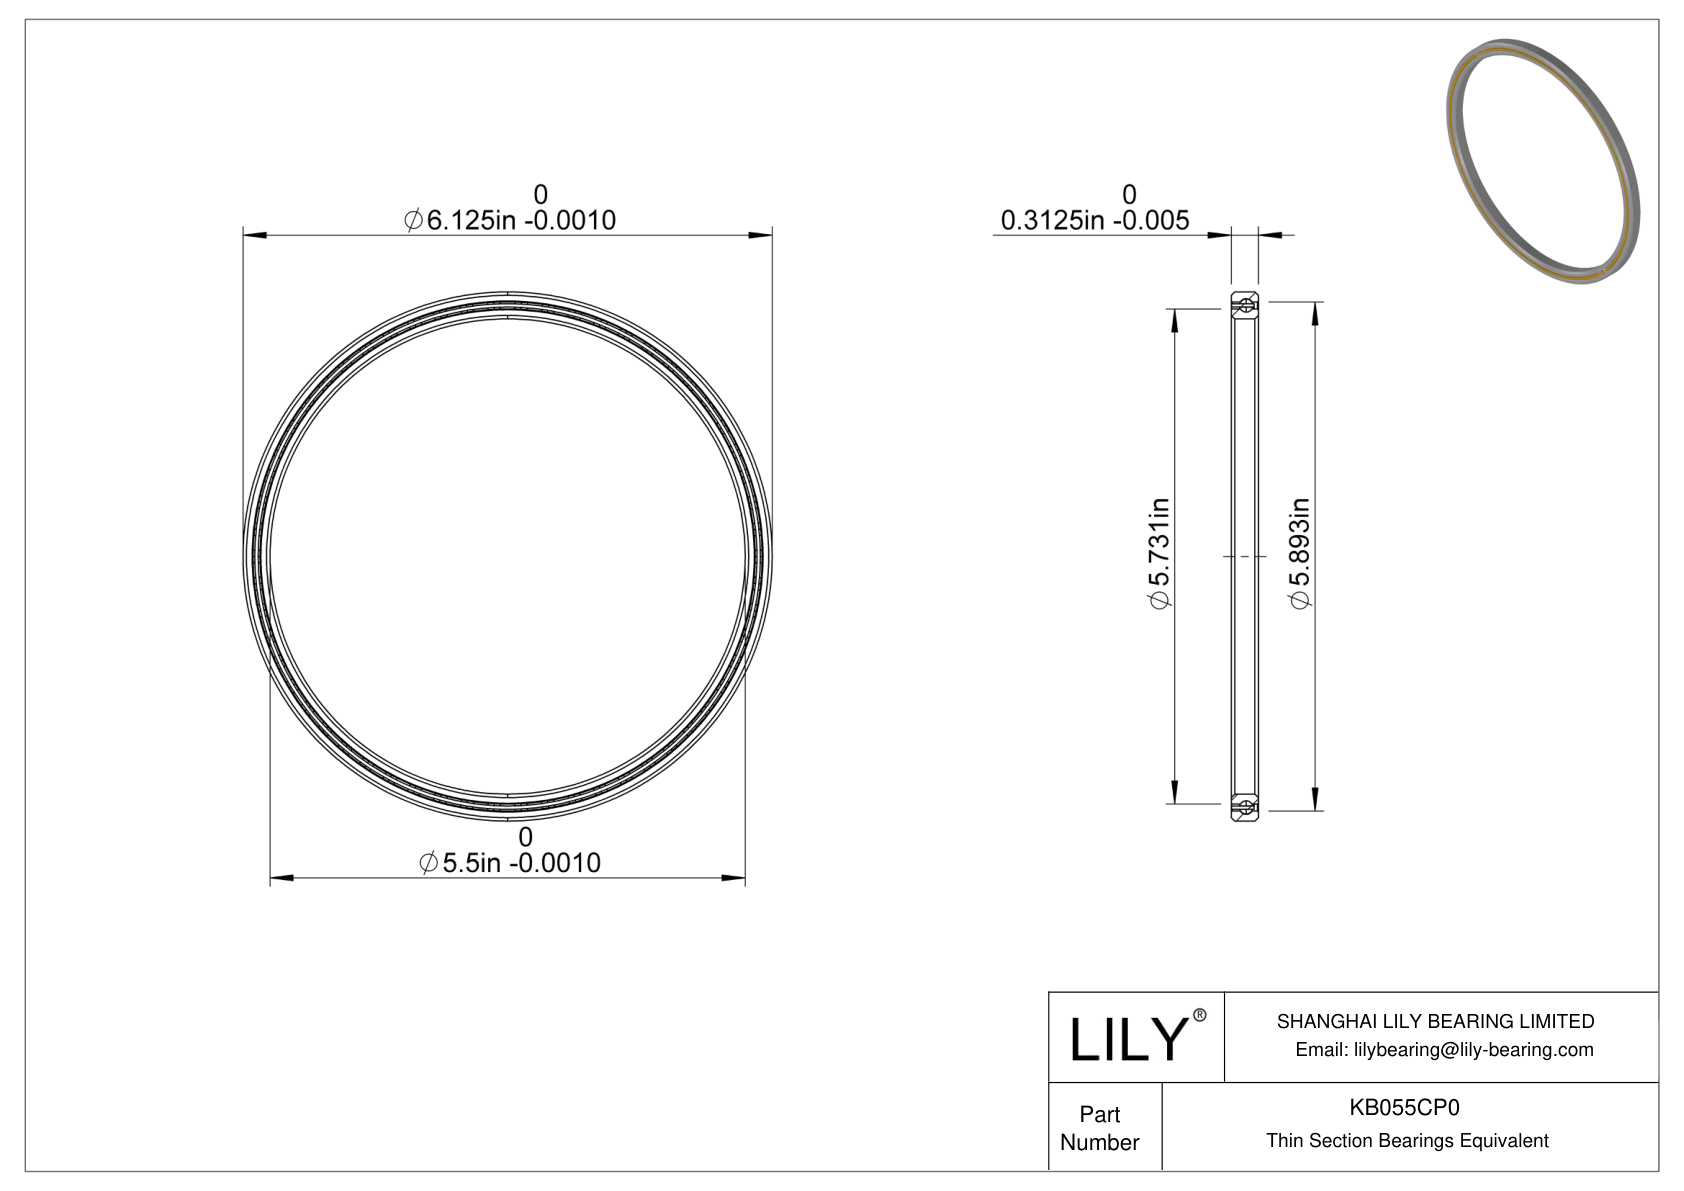 KB055CP0 Constant Section (CS) Bearings cad drawing